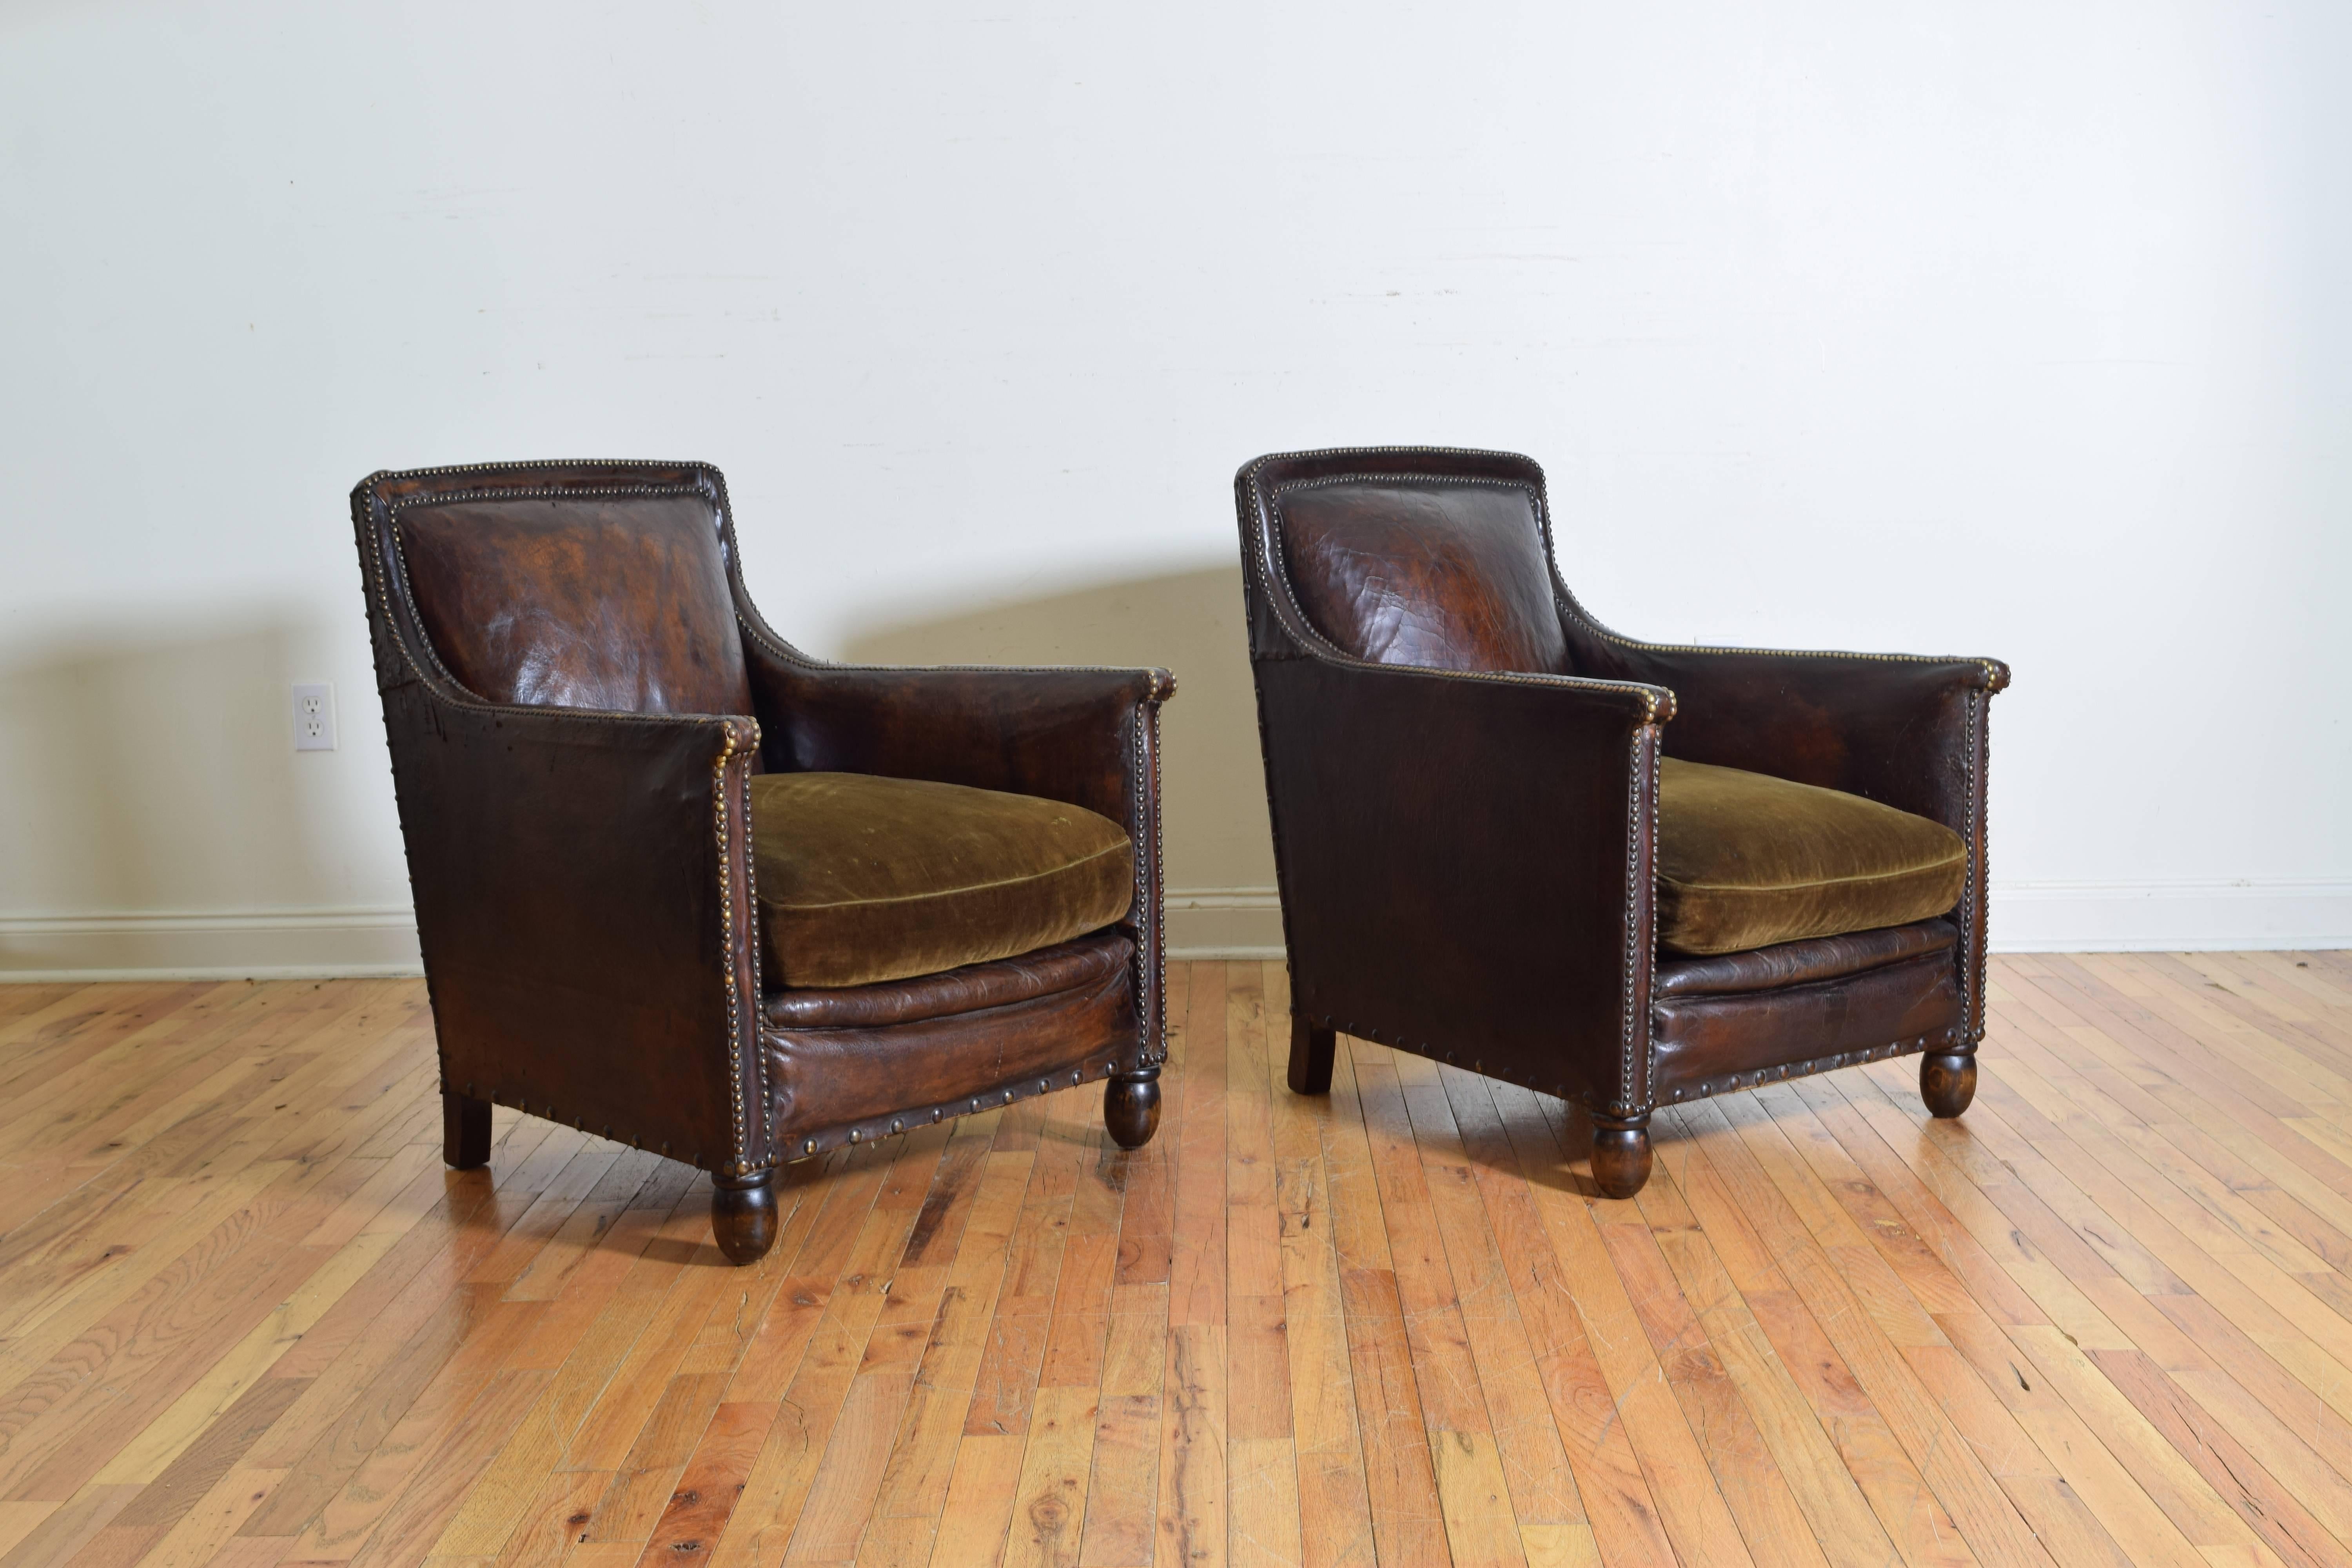 The leather in near perfect condition and trimmed in patinated brass nailheads, velvet cushions, sit comfortably, raised on acorn shaped turned walnut feet.